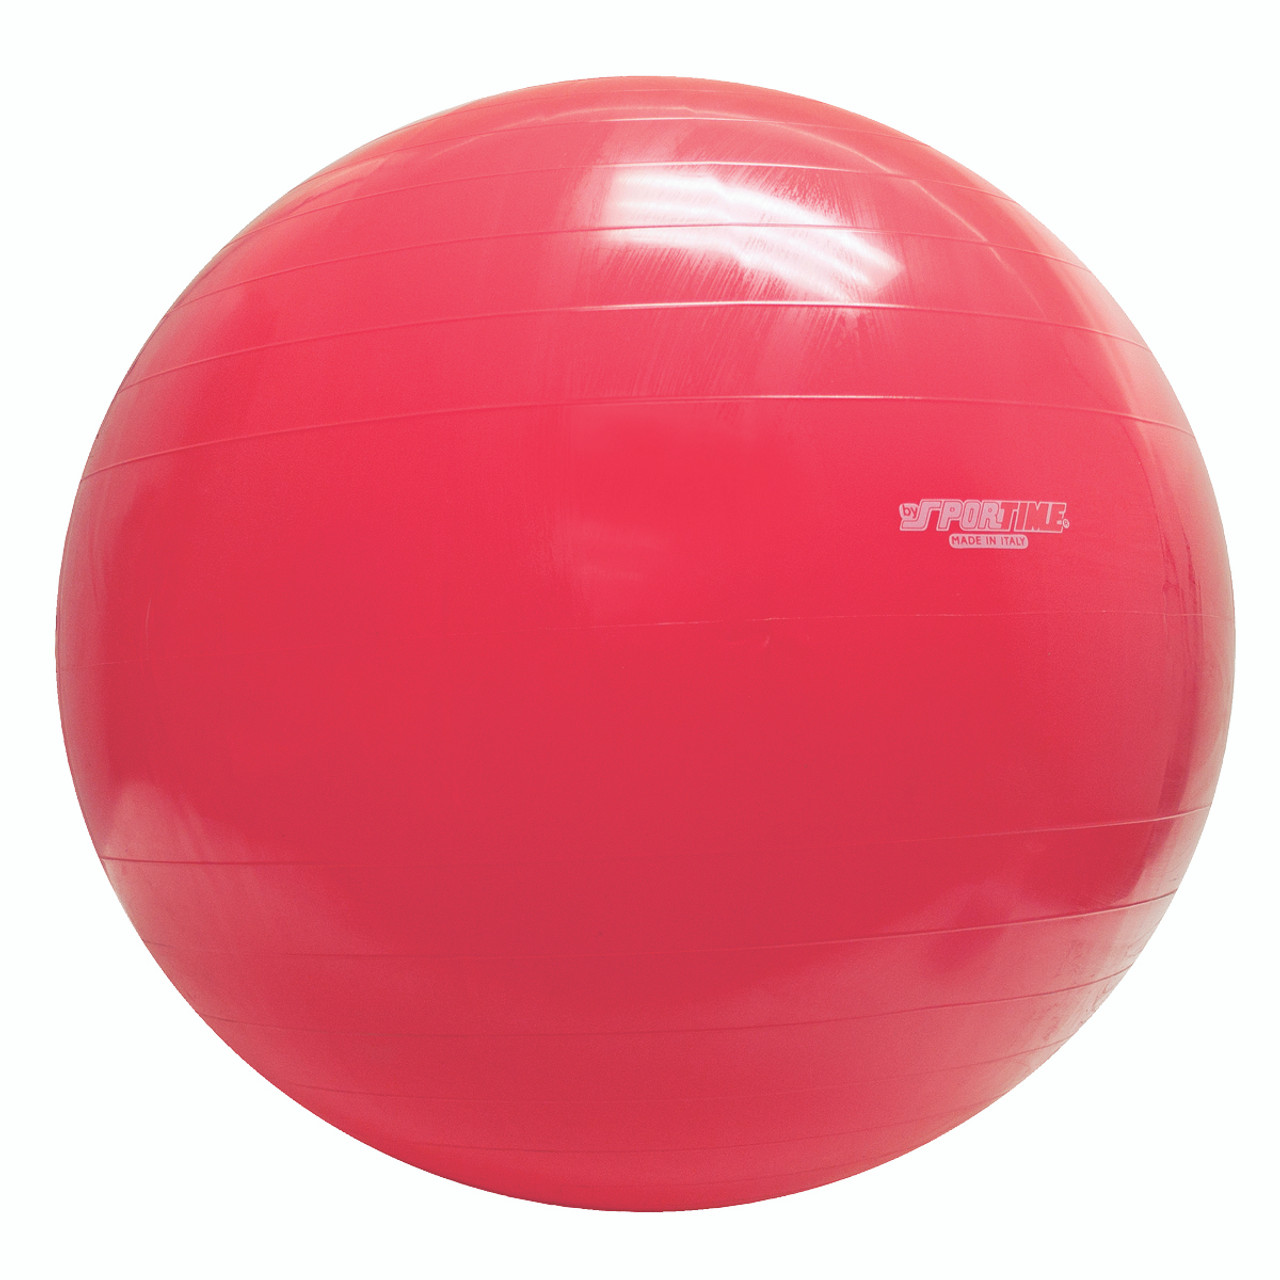 PhysioGymnicª Inflatable Exercise Ball - Red - 38" (95 cm)